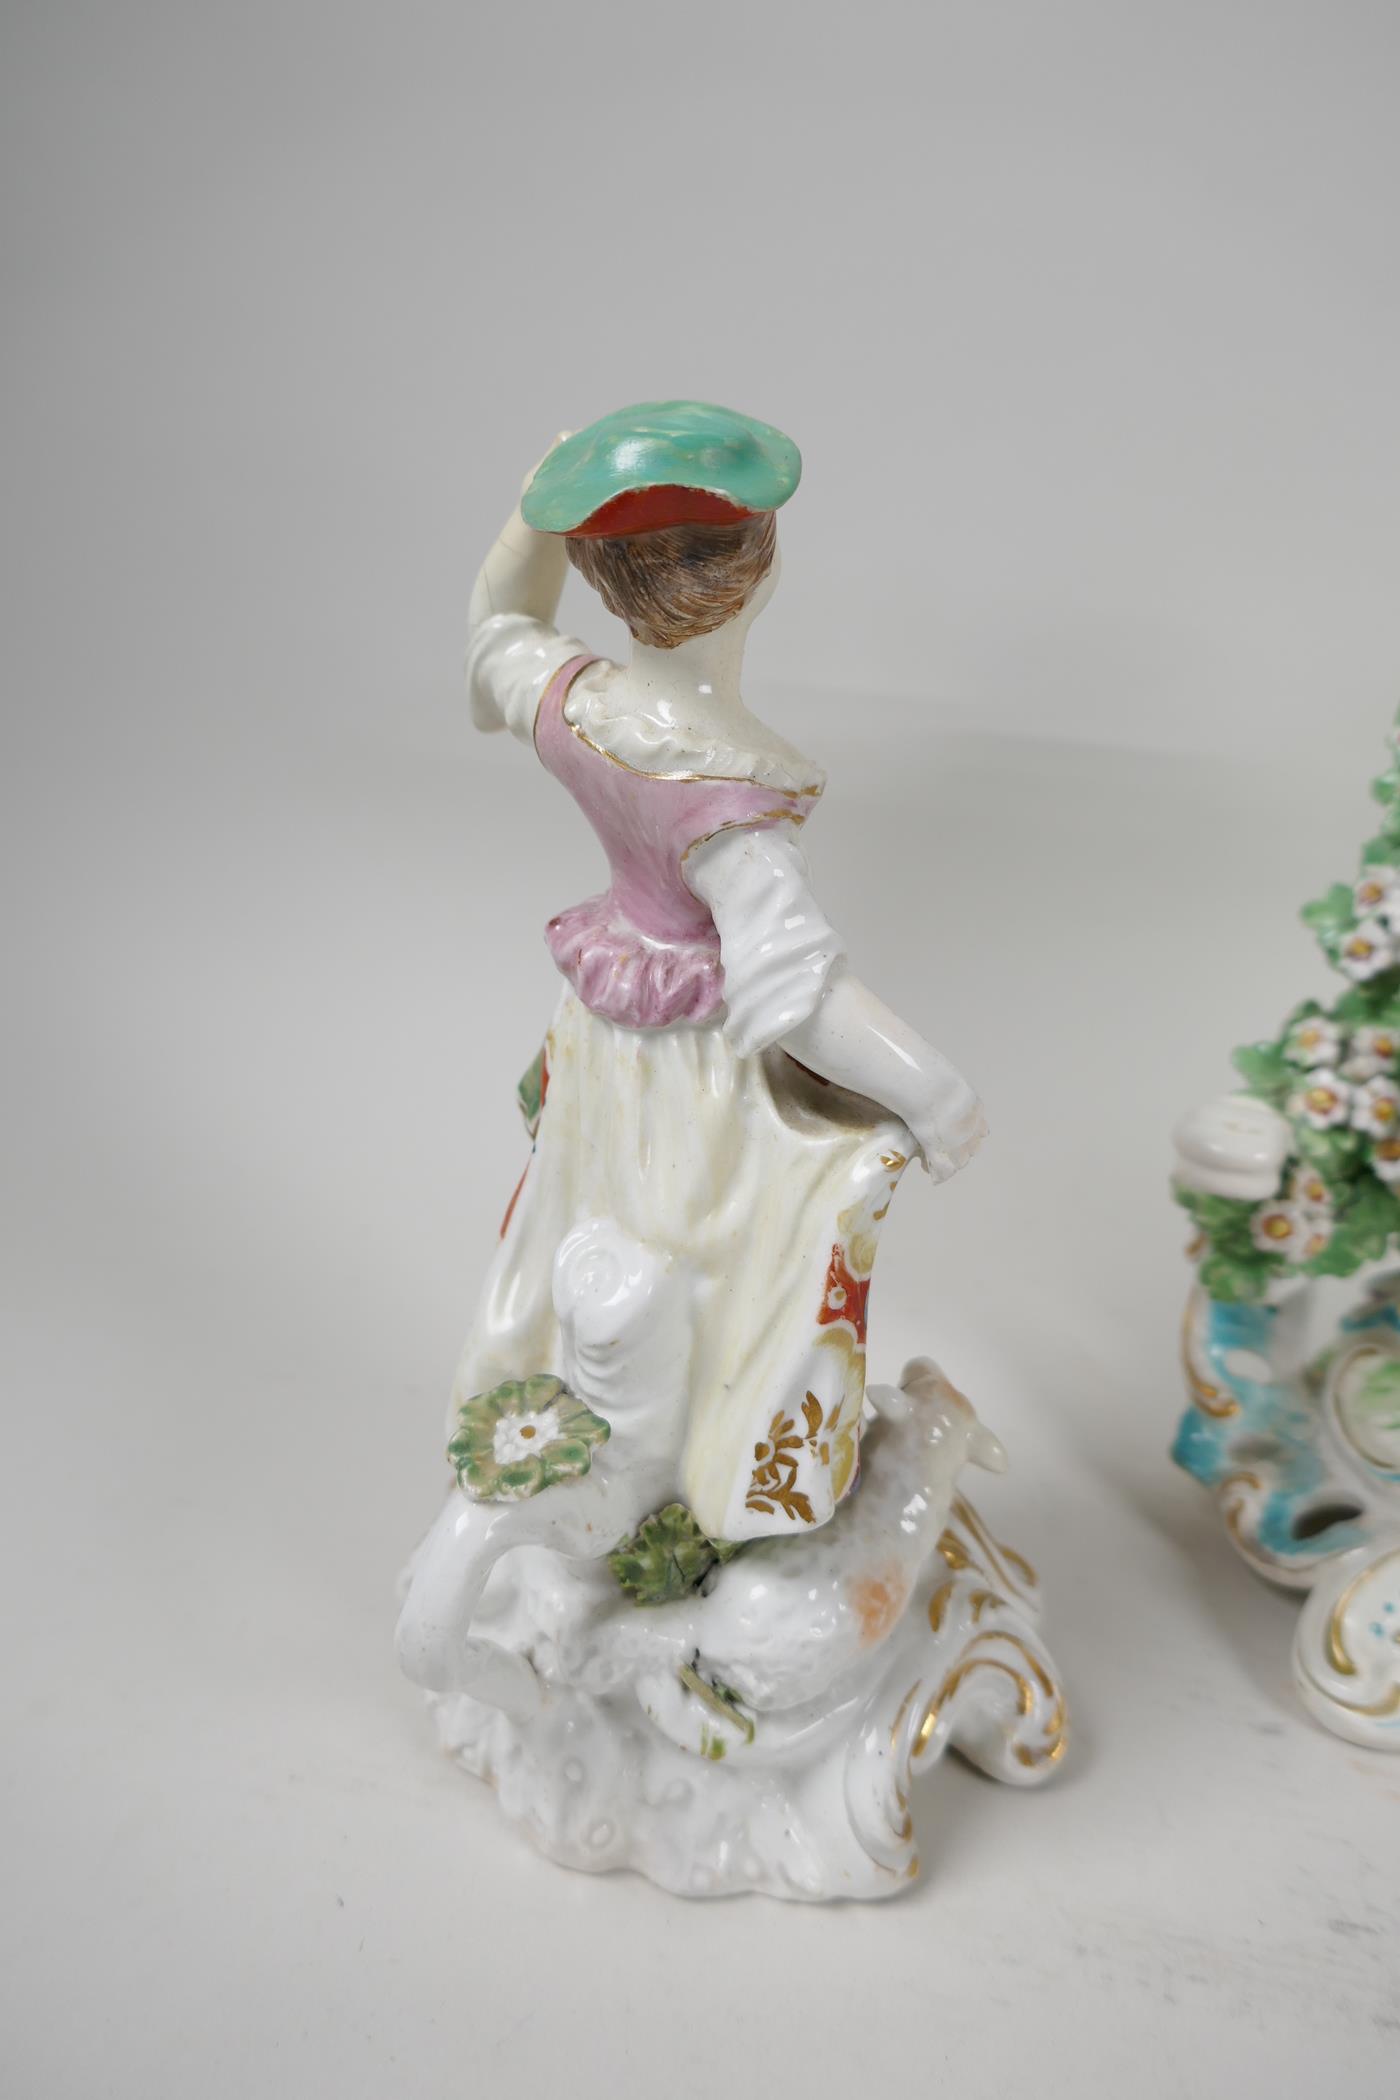 Three early English porcelain figures, a brocage figure of a woman and child (Chelsea) 8" high, a - Image 3 of 7